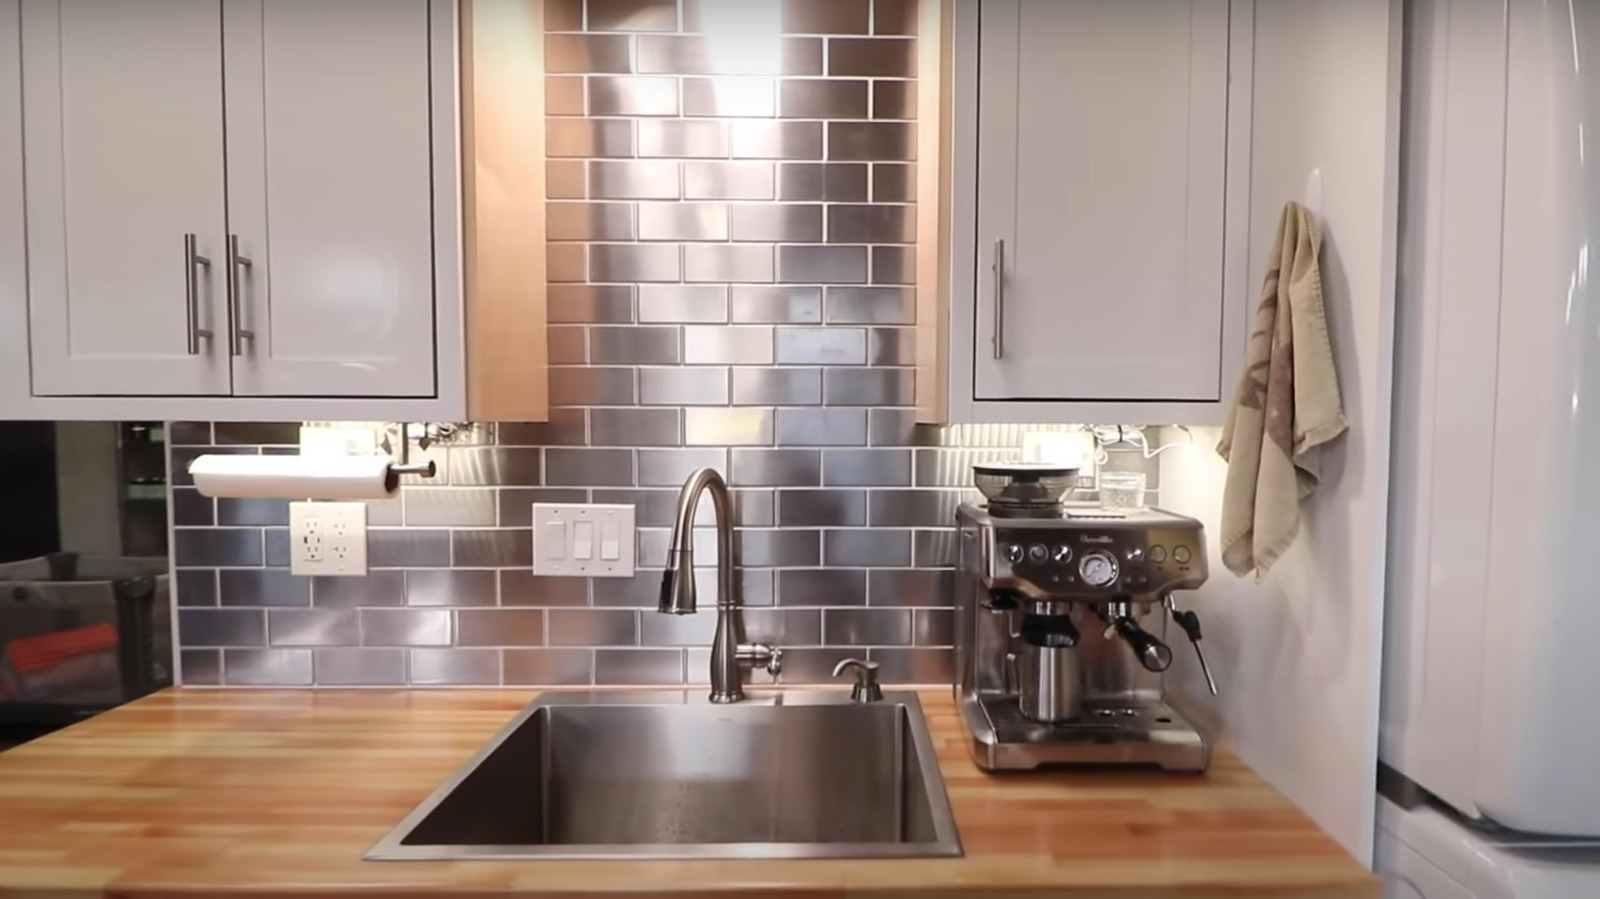 Here's Why A Stainless Steel Backsplash Just Might Be The Most Durable For  Your Kitchen